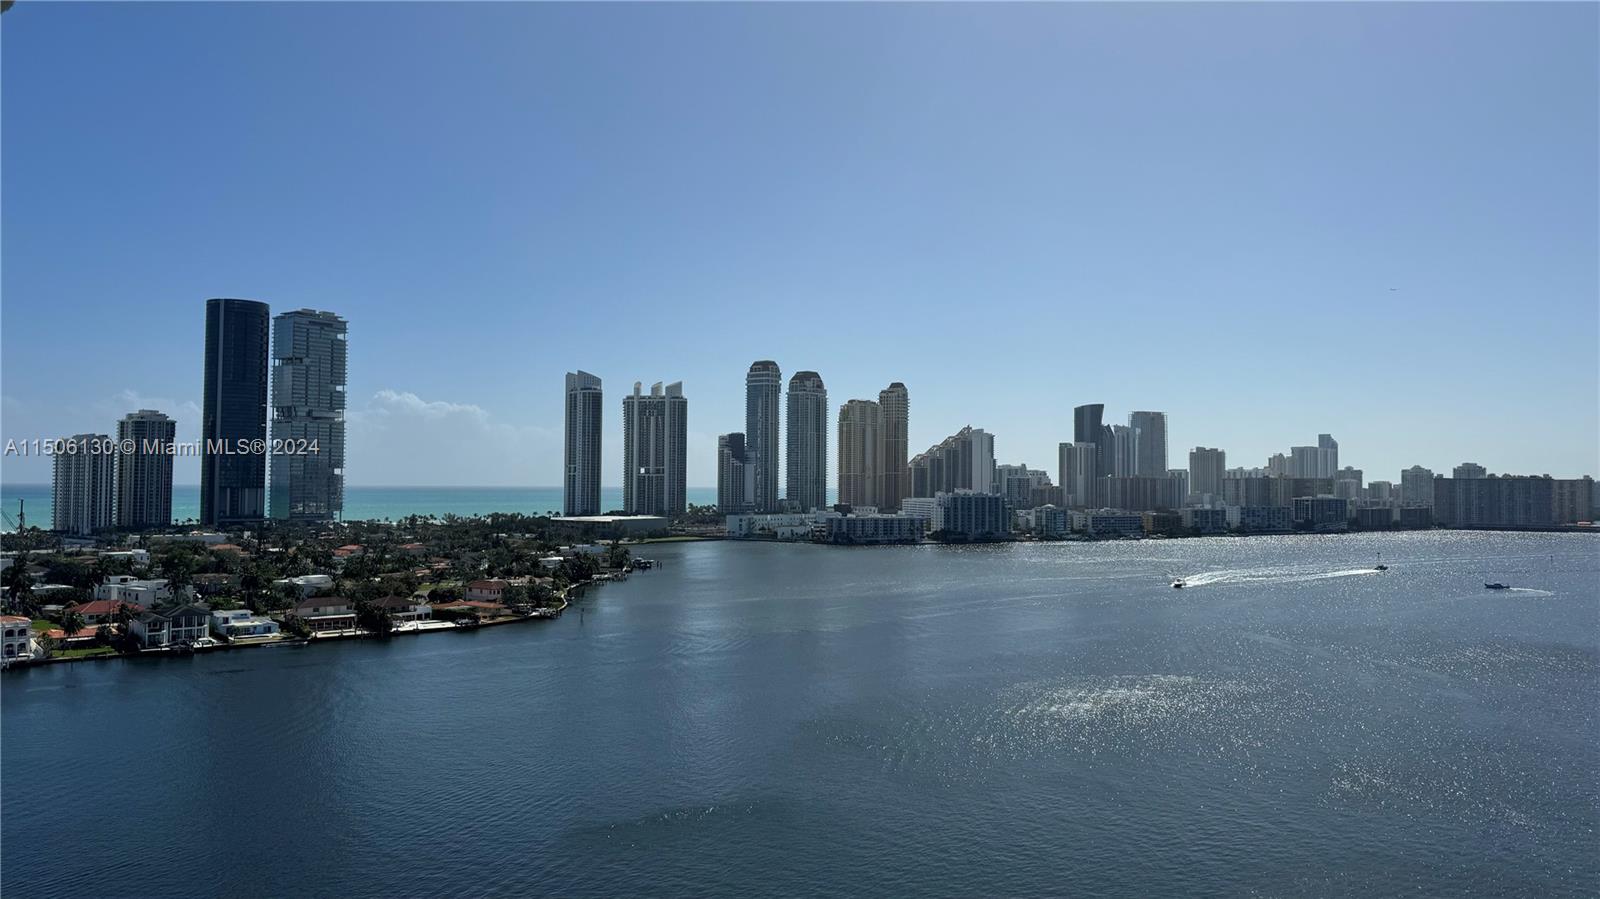 The ULTIMATE Penthouse! Rare opportunity to own the best unit in the area! UNIQUE VIEWS of the intracoastal and the ocean across Sunny Isles and all South Miami! 2 spacious bedrooms, 2 full bathrooms with shower and tub recently renovated. Exquisite marble floors throughout the unit and wrap around balcony! Tasteful tile floor on the living room and master bedroom! Brand new stainless steel appliances with washer and dryer. Comes with 3 assigned parking spots one of which is covered and can all be sold individually. Association includes cable, internet, water, trash, sewage. Owner pays only for electricity. Unit comes with assigned storage! Wait no more! Schedule a showing now!